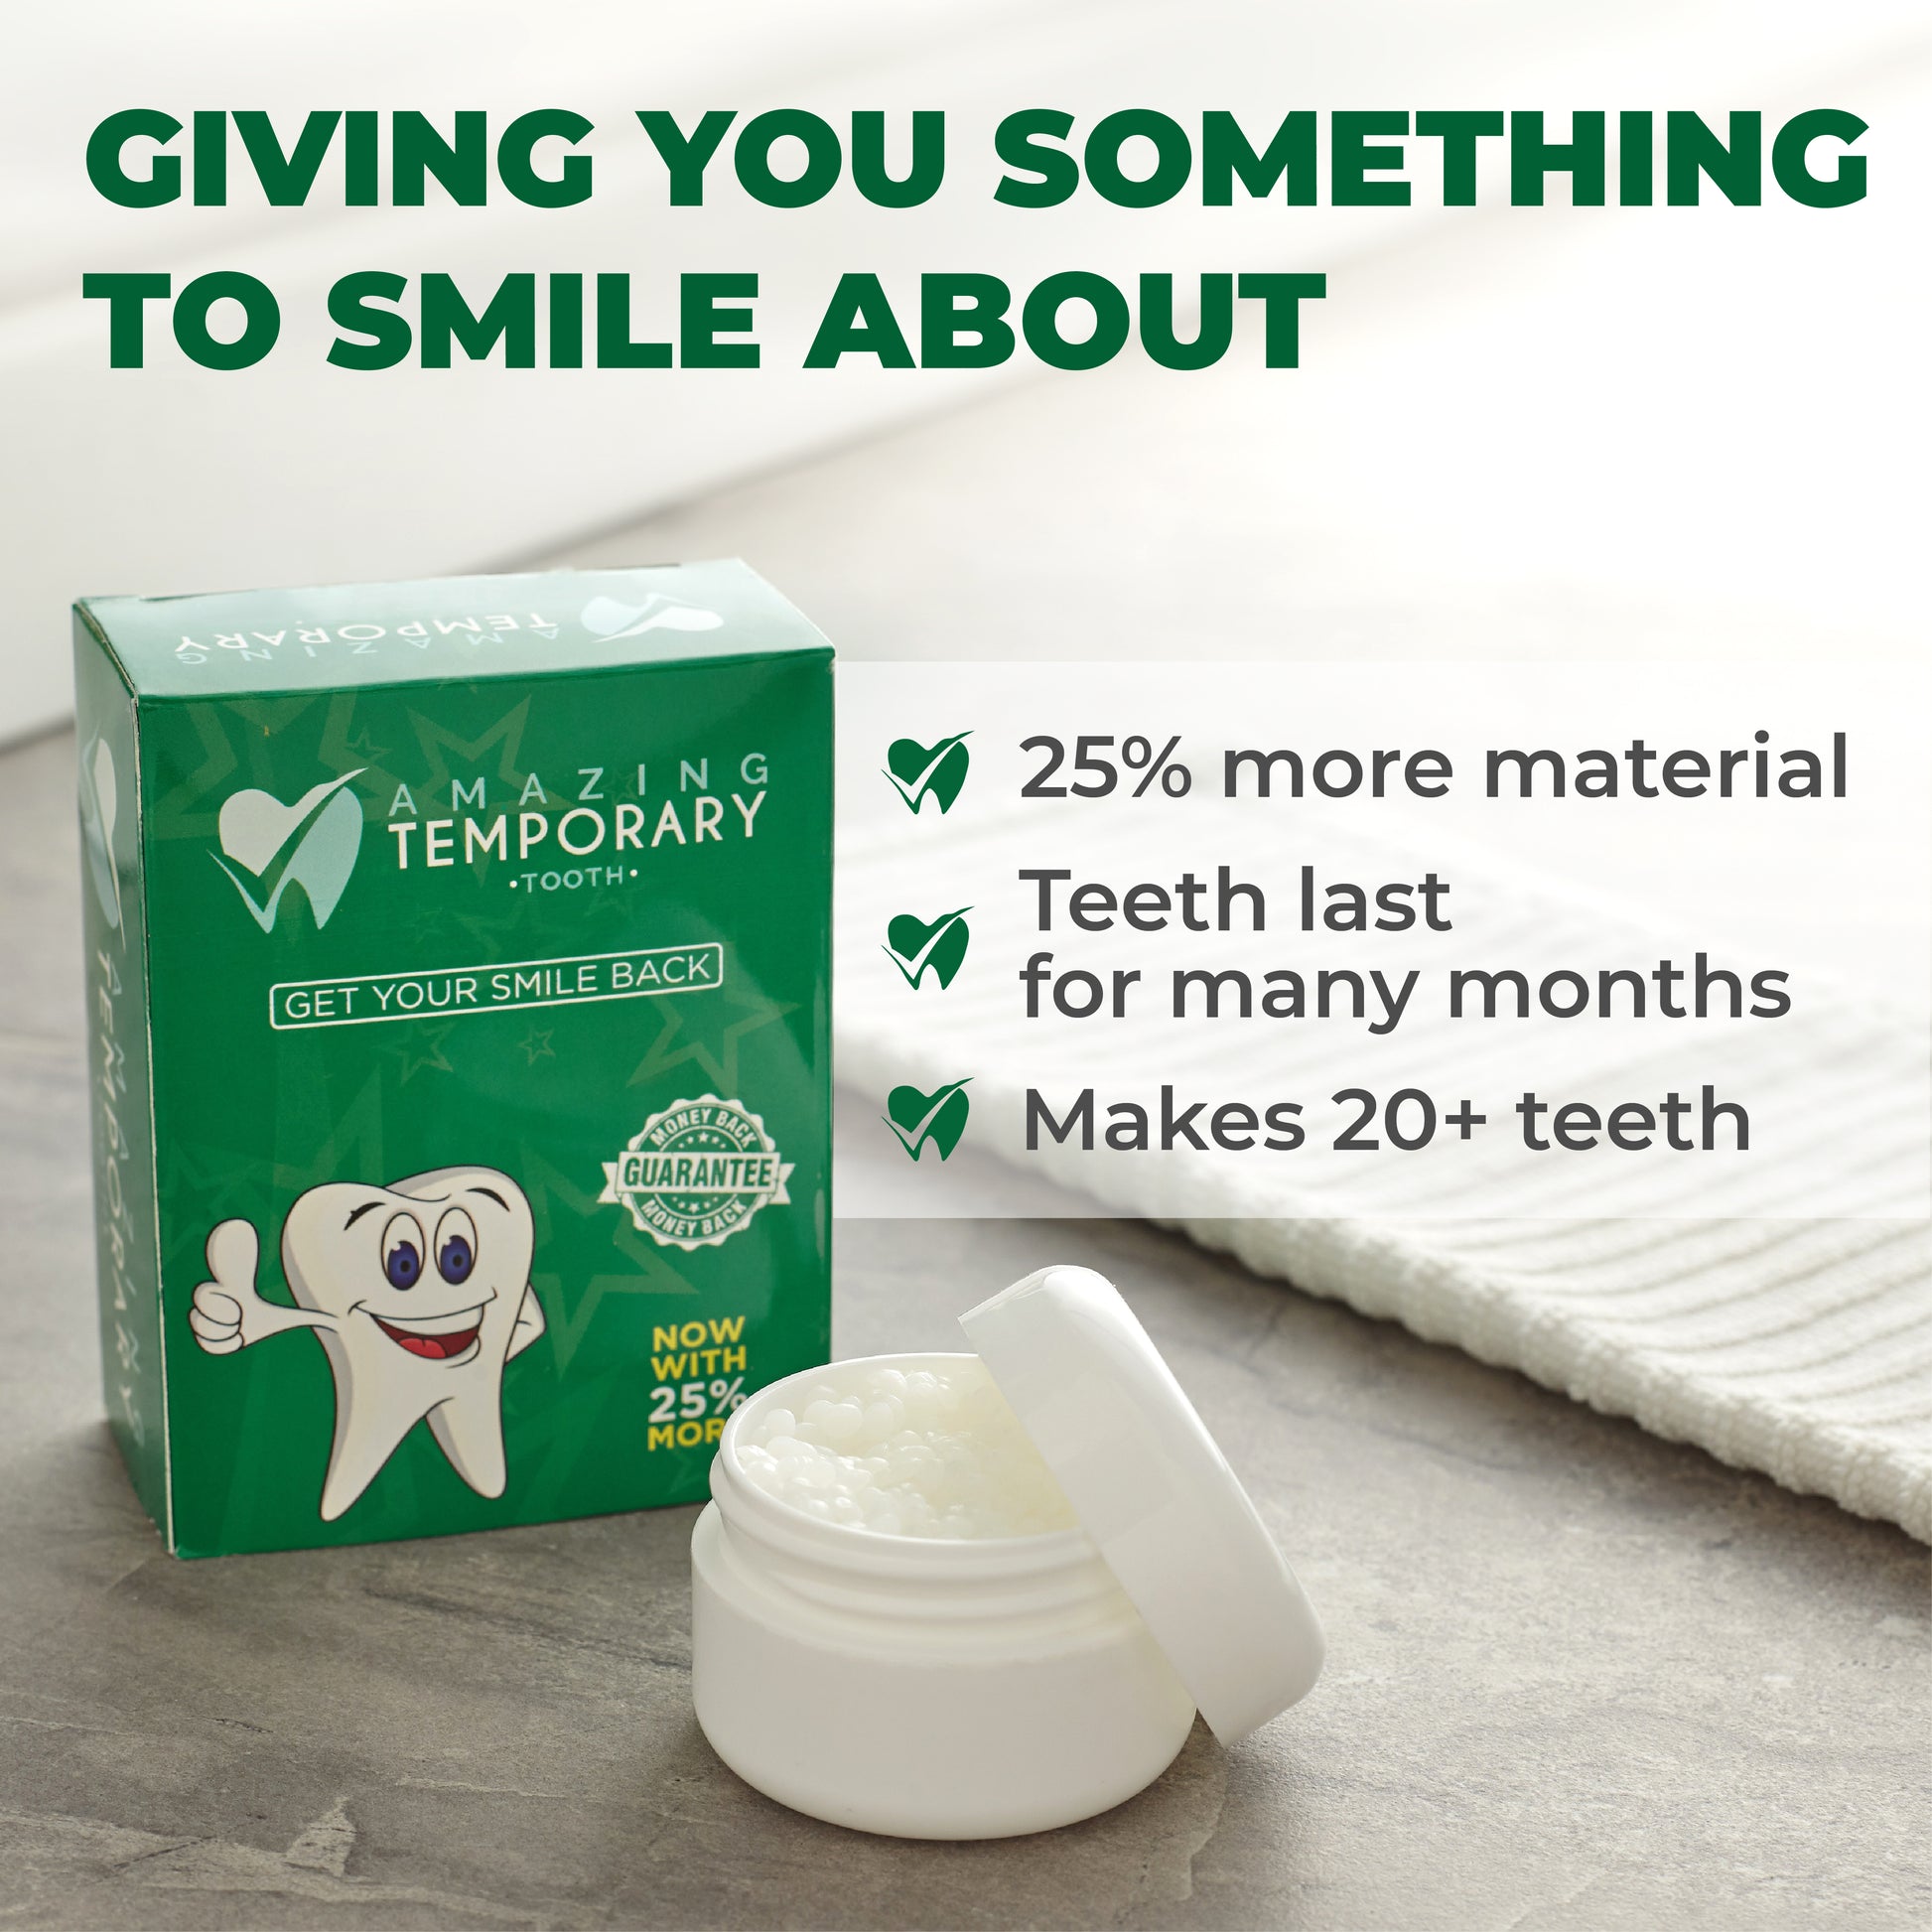 Instant Smile Complete Your Smile Temporary Tooth Replacement Kit - Temp a  missing tooth in minutes 